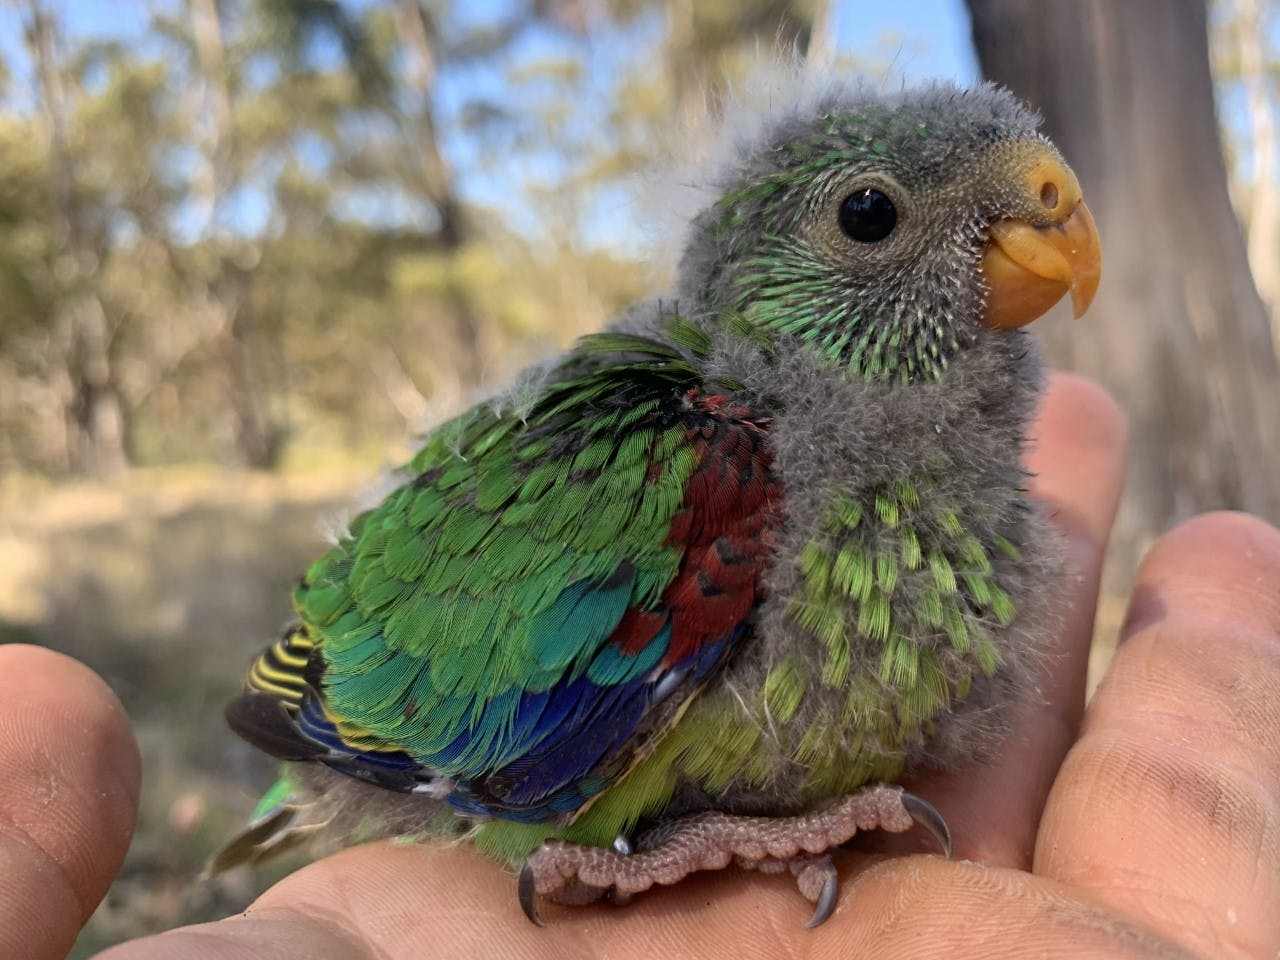 baby parrot with grey, green, red and blue feathers is cupped in a person's hand